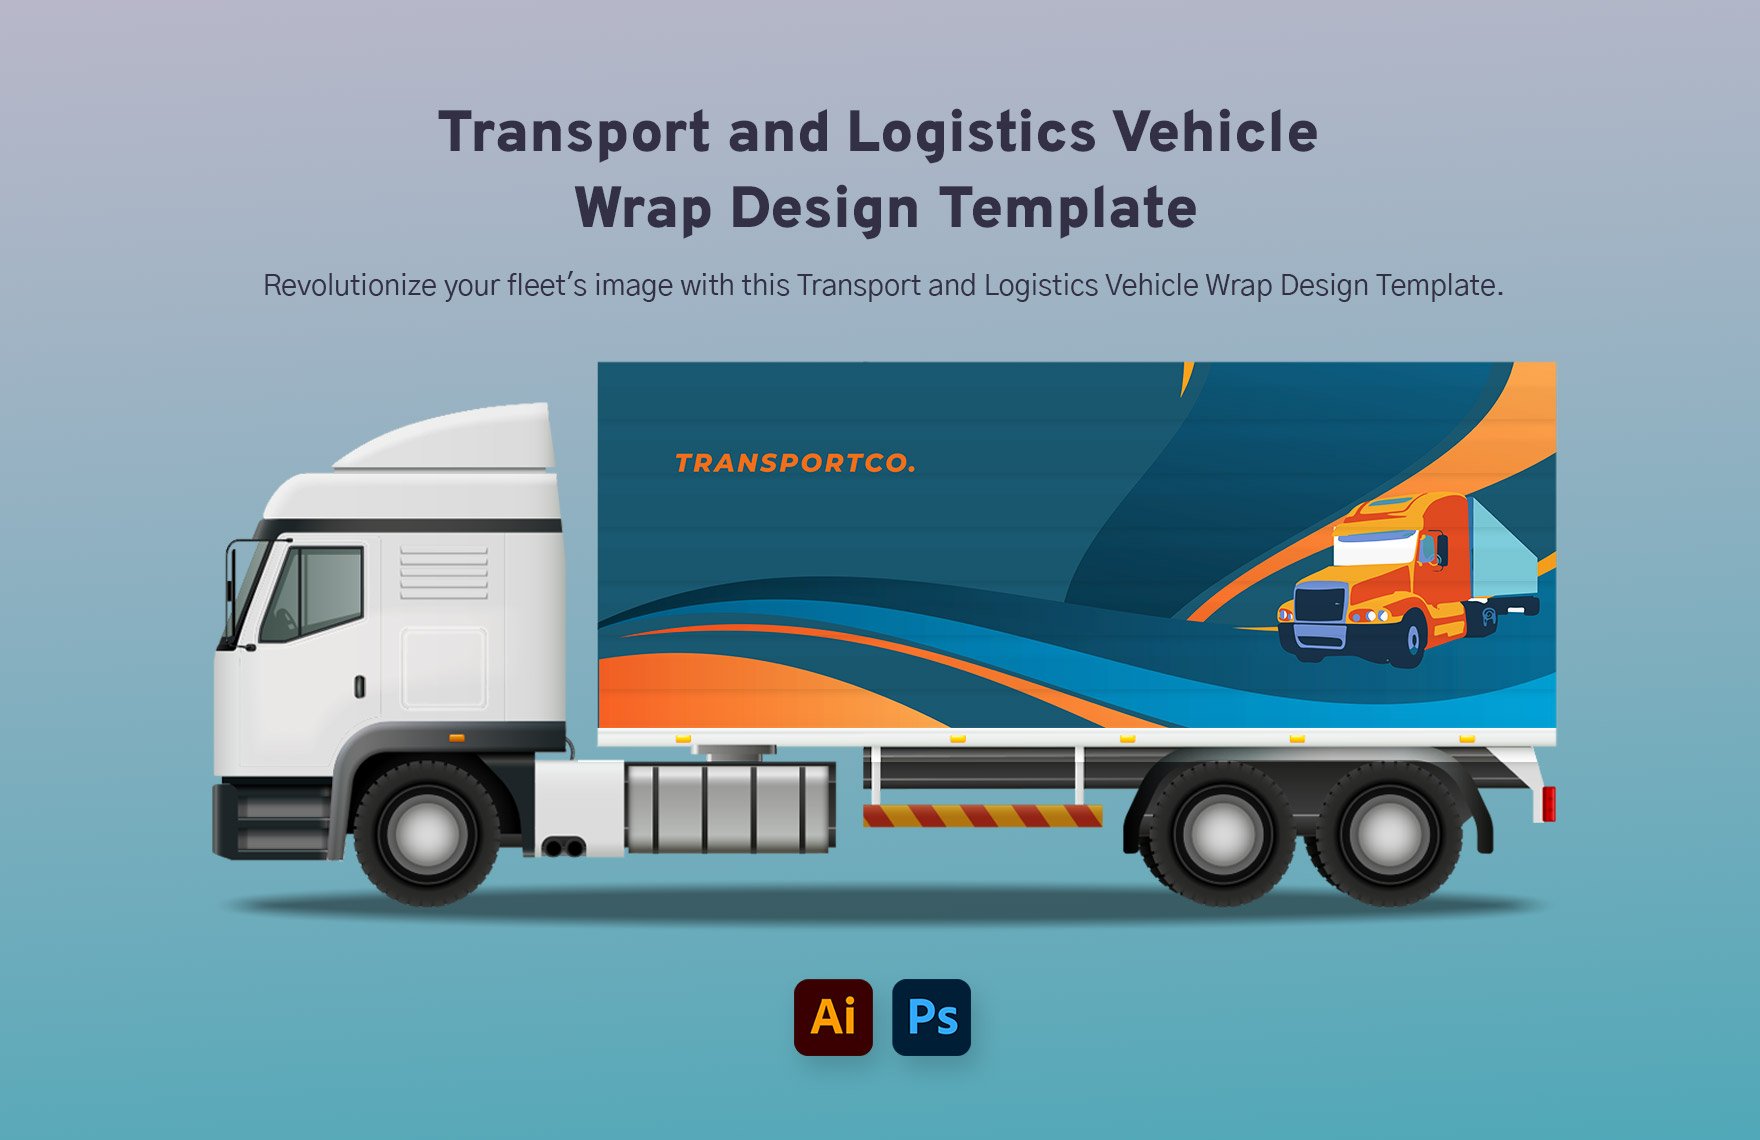 Transport and Logistics Vehicle Wrap Design Template in Illustrator, PSD